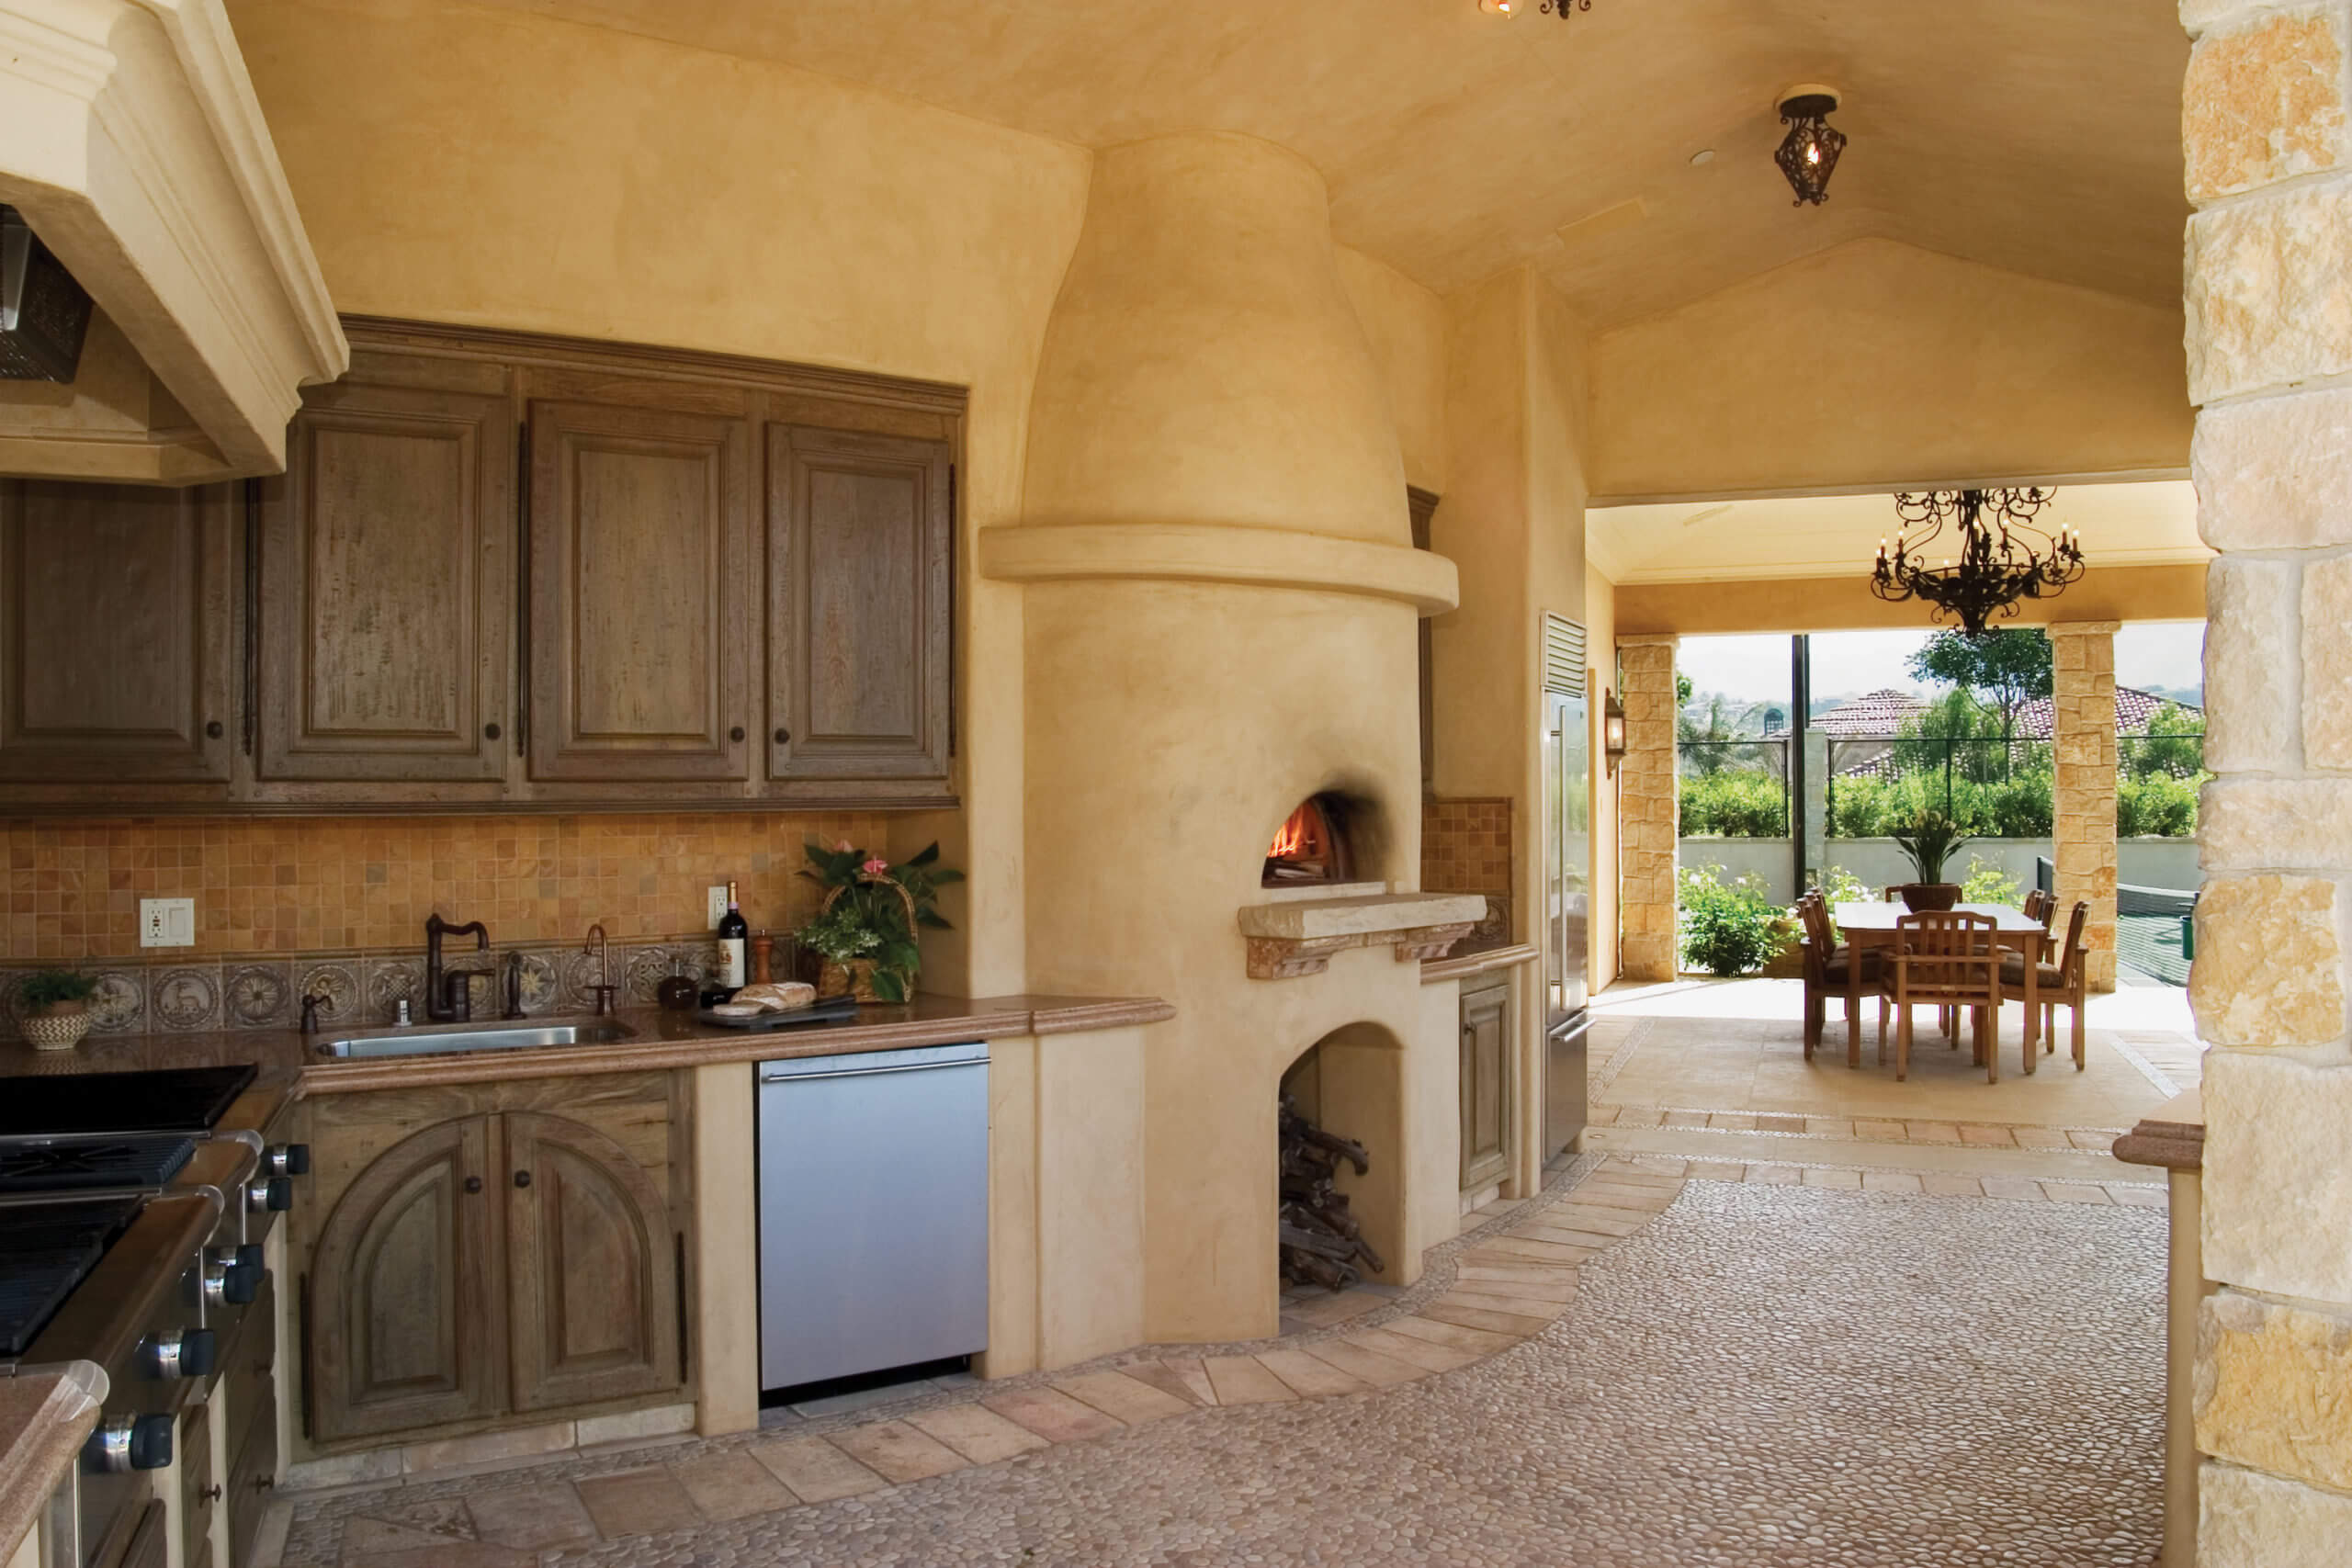 residential mediterranean style kitchen with Mugnaini wood oven